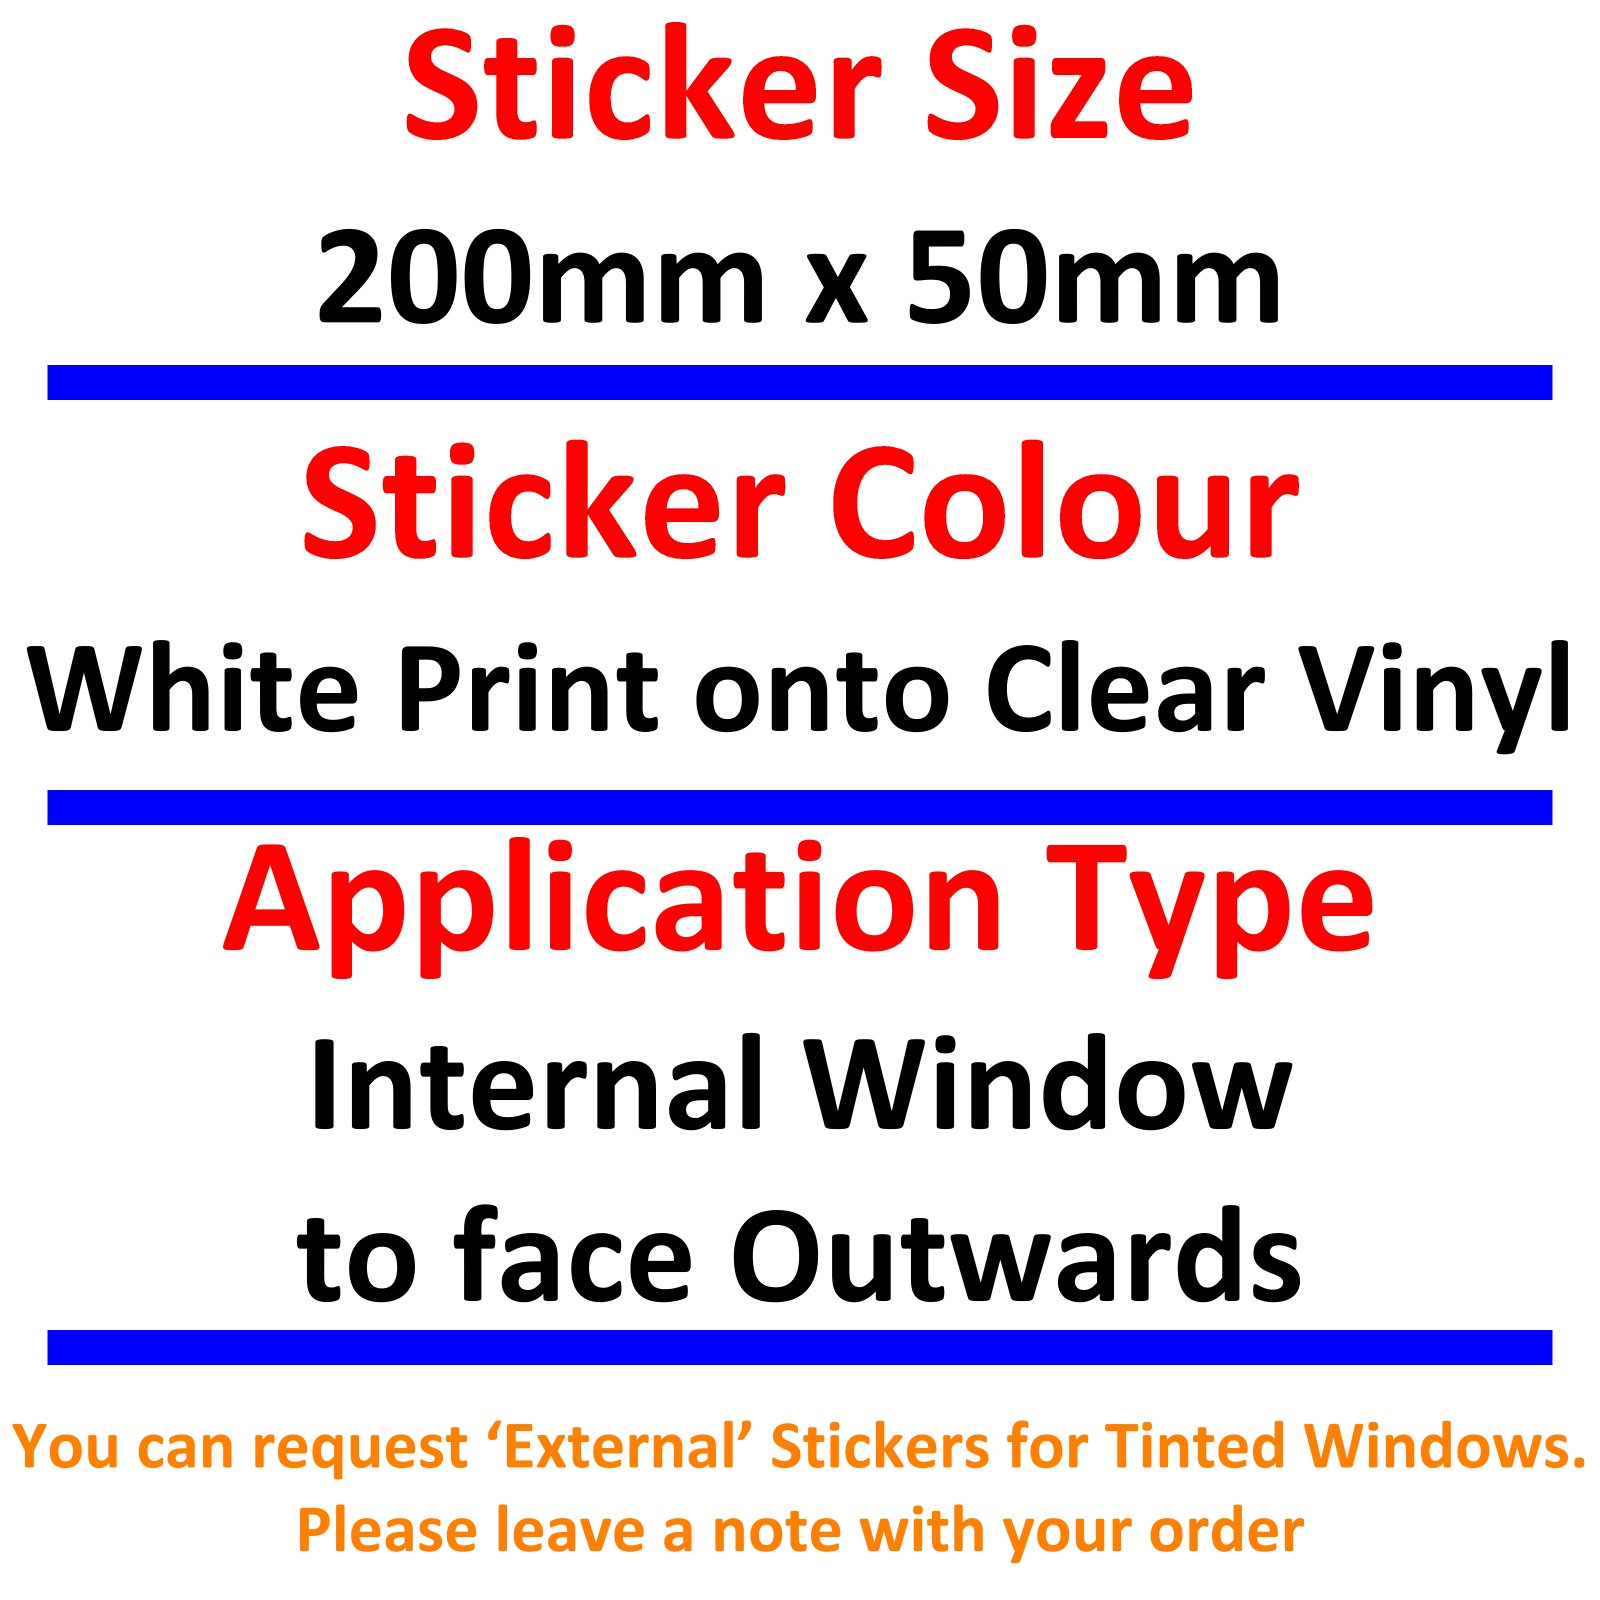 Office/Shop/Car/Taxi/Home/Window CCTV in operation Warning Stickers Sign 